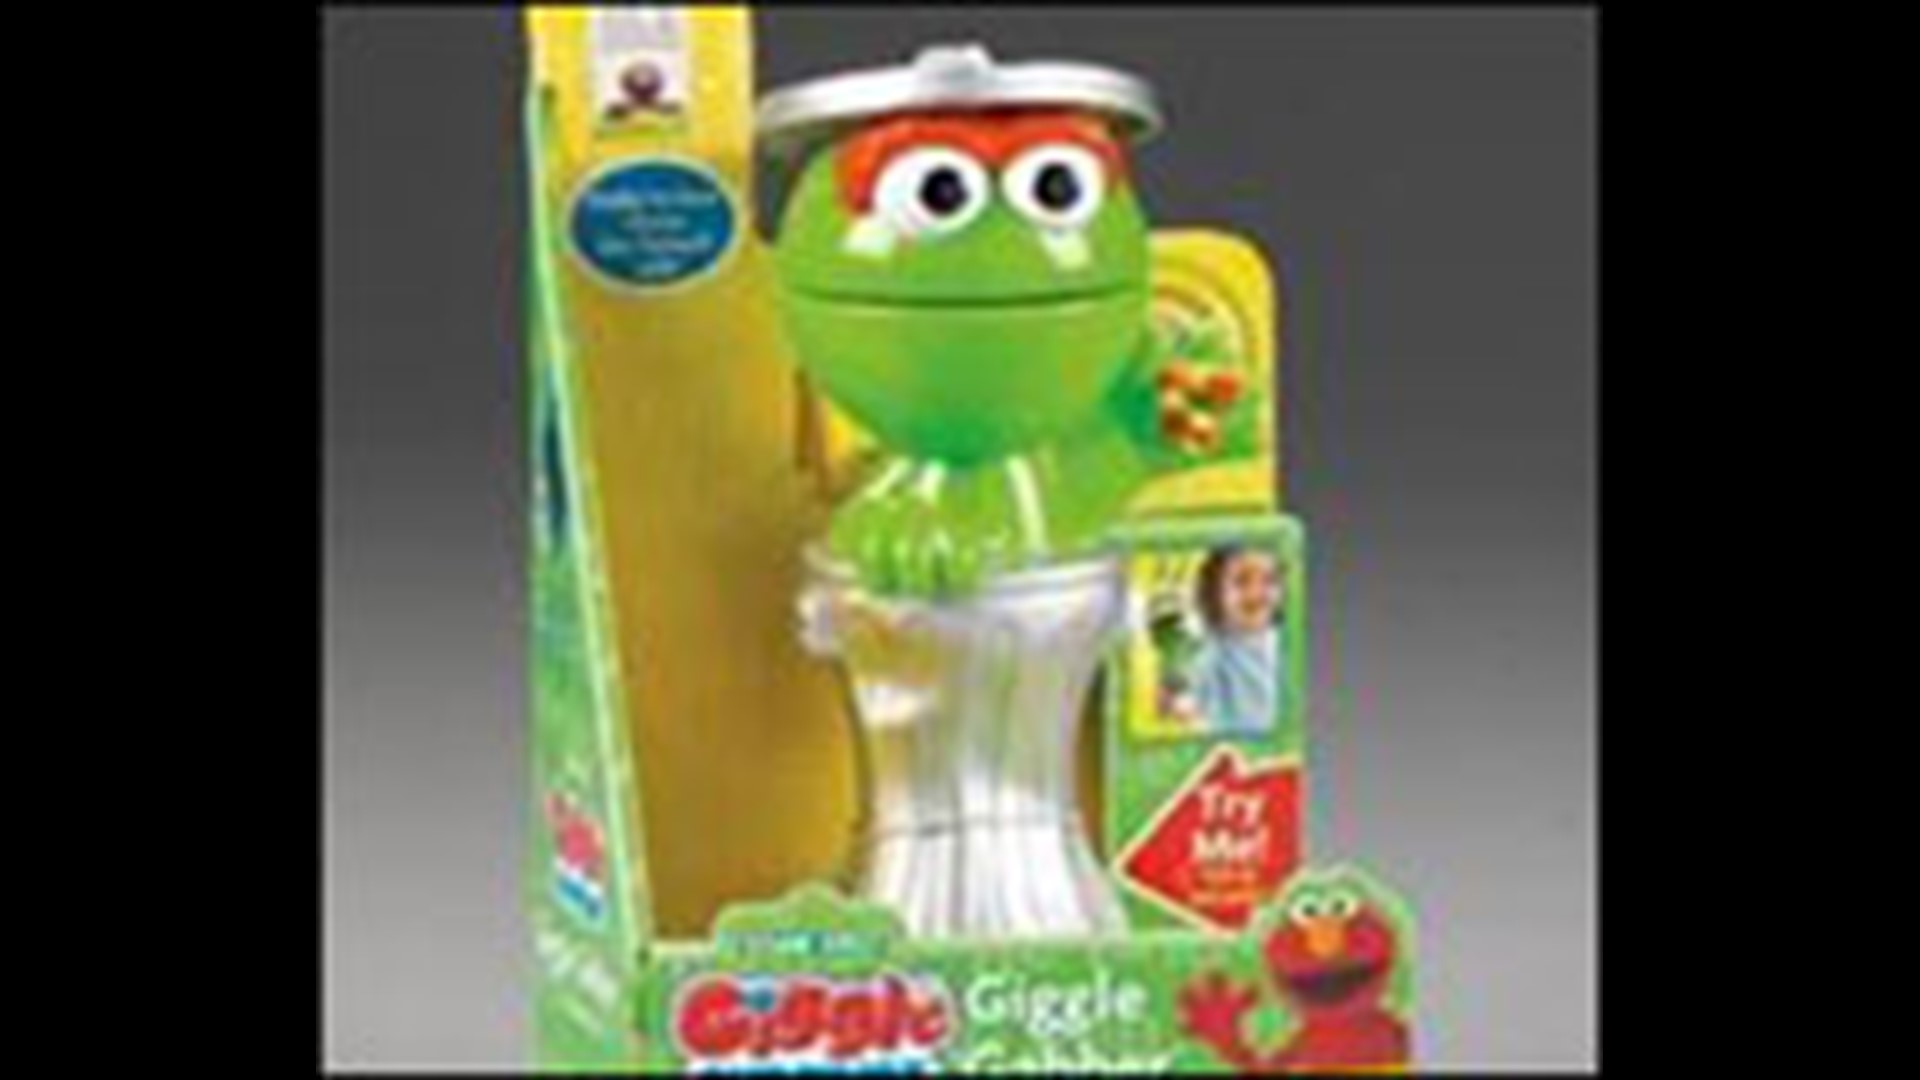 State lead testing for kids who had recalled toys